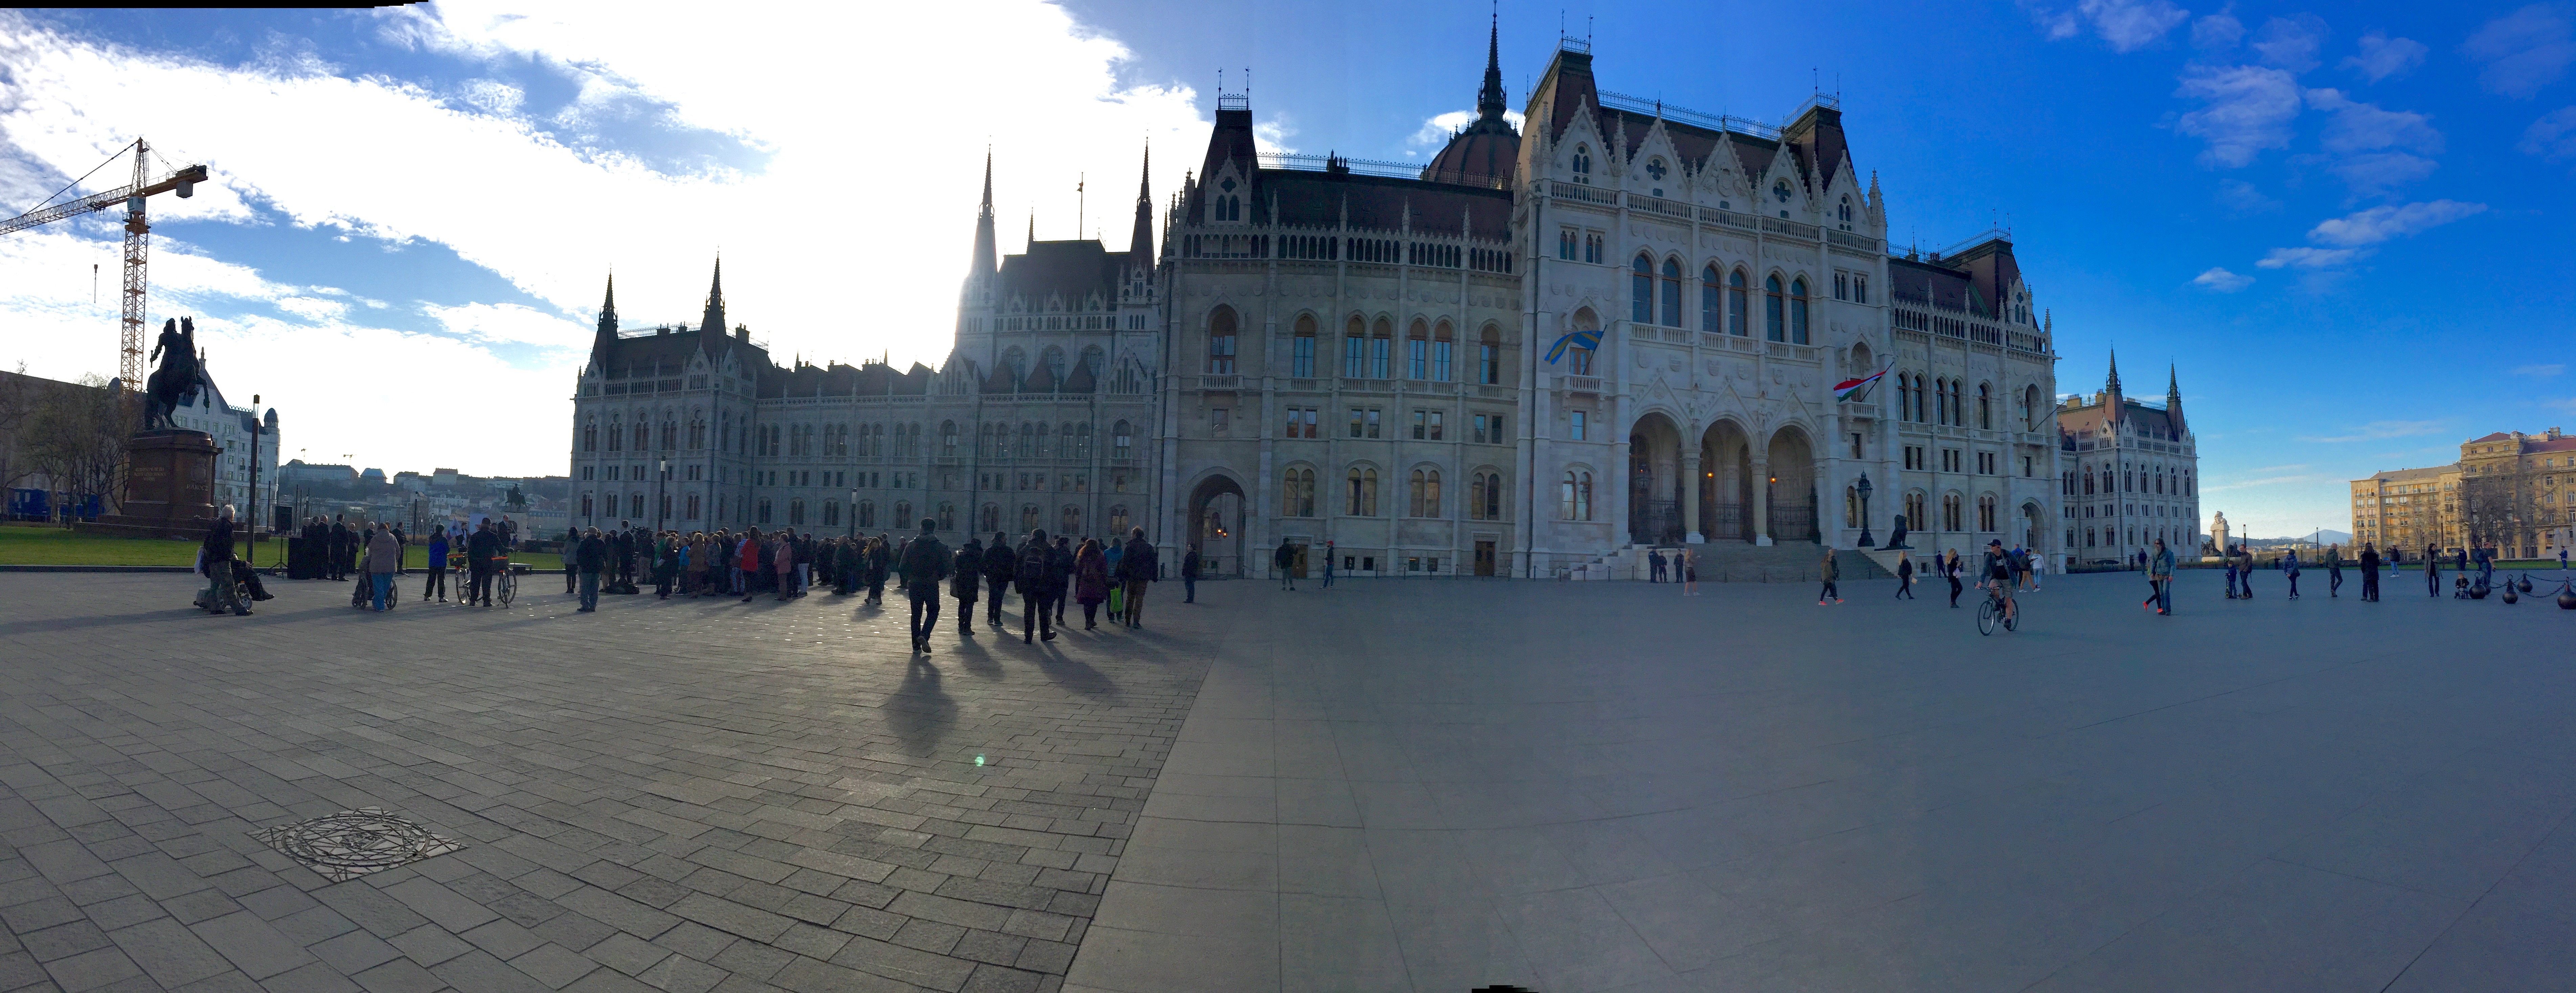 Budapest itinerary|The Budapest Parliament